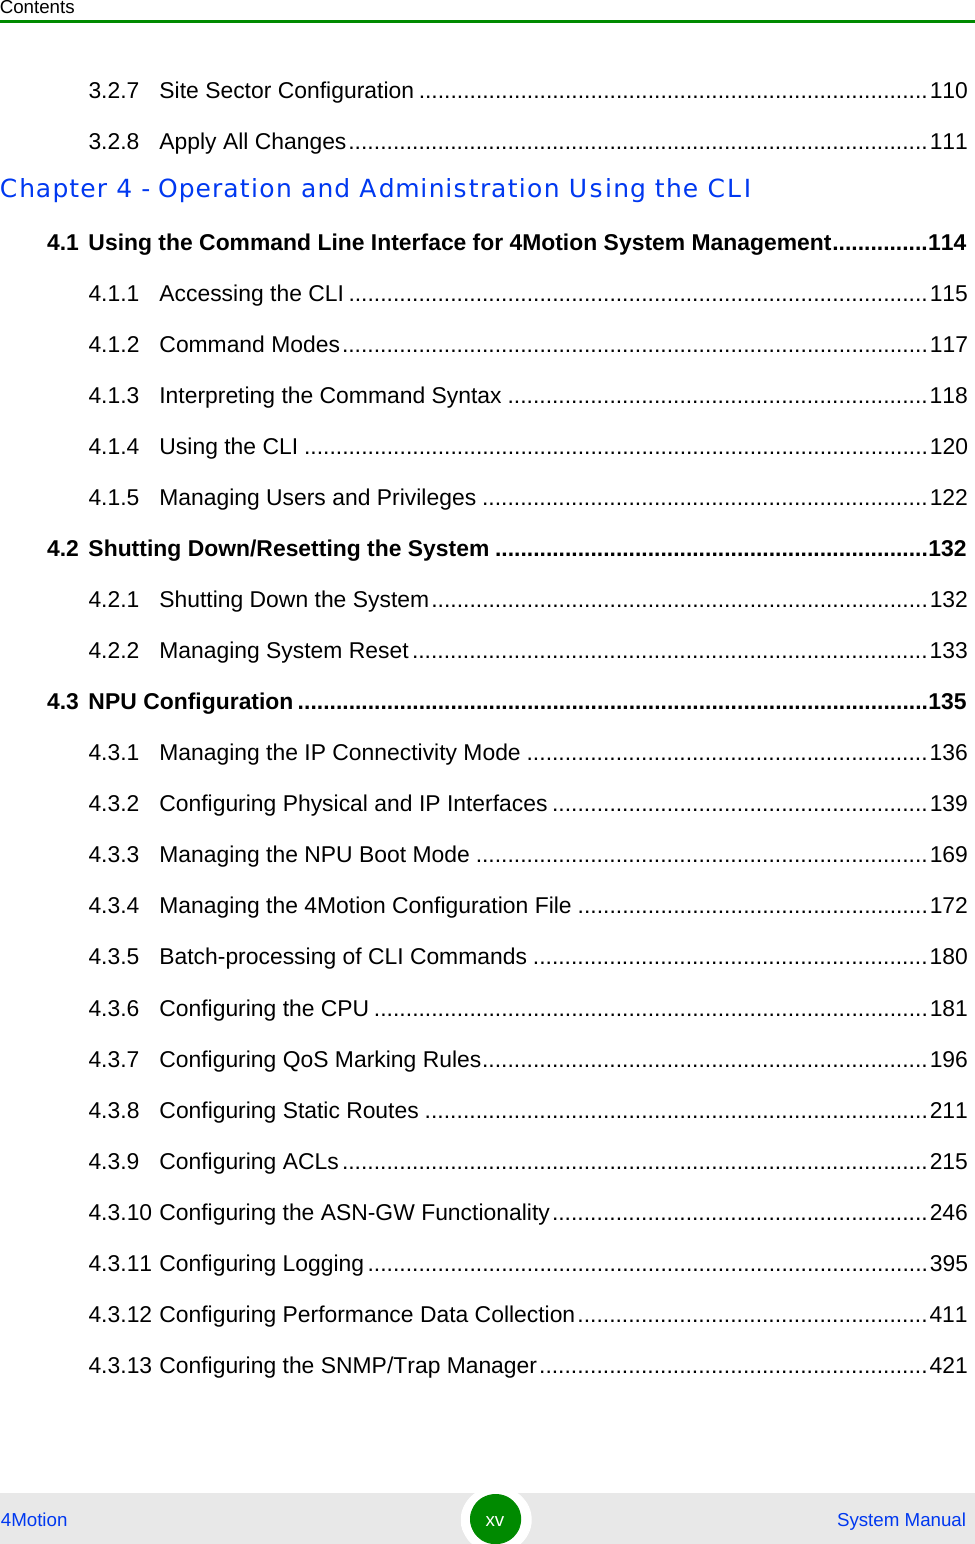 Contents4Motion xv  System Manual3.2.7 Site Sector Configuration ................................................................................1103.2.8 Apply All Changes...........................................................................................111Chapter 4 - Operation and Administration Using the CLI4.1 Using the Command Line Interface for 4Motion System Management...............1144.1.1 Accessing the CLI ...........................................................................................1154.1.2 Command Modes............................................................................................1174.1.3 Interpreting the Command Syntax ..................................................................1184.1.4 Using the CLI ..................................................................................................1204.1.5 Managing Users and Privileges ......................................................................1224.2 Shutting Down/Resetting the System ....................................................................1324.2.1 Shutting Down the System..............................................................................1324.2.2 Managing System Reset.................................................................................1334.3 NPU Configuration ...................................................................................................1354.3.1 Managing the IP Connectivity Mode ...............................................................1364.3.2 Configuring Physical and IP Interfaces ...........................................................1394.3.3 Managing the NPU Boot Mode .......................................................................1694.3.4 Managing the 4Motion Configuration File .......................................................1724.3.5 Batch-processing of CLI Commands ..............................................................1804.3.6 Configuring the CPU .......................................................................................1814.3.7 Configuring QoS Marking Rules......................................................................1964.3.8 Configuring Static Routes ...............................................................................2114.3.9 Configuring ACLs............................................................................................2154.3.10 Configuring the ASN-GW Functionality...........................................................2464.3.11 Configuring Logging........................................................................................3954.3.12 Configuring Performance Data Collection.......................................................4114.3.13 Configuring the SNMP/Trap Manager.............................................................421